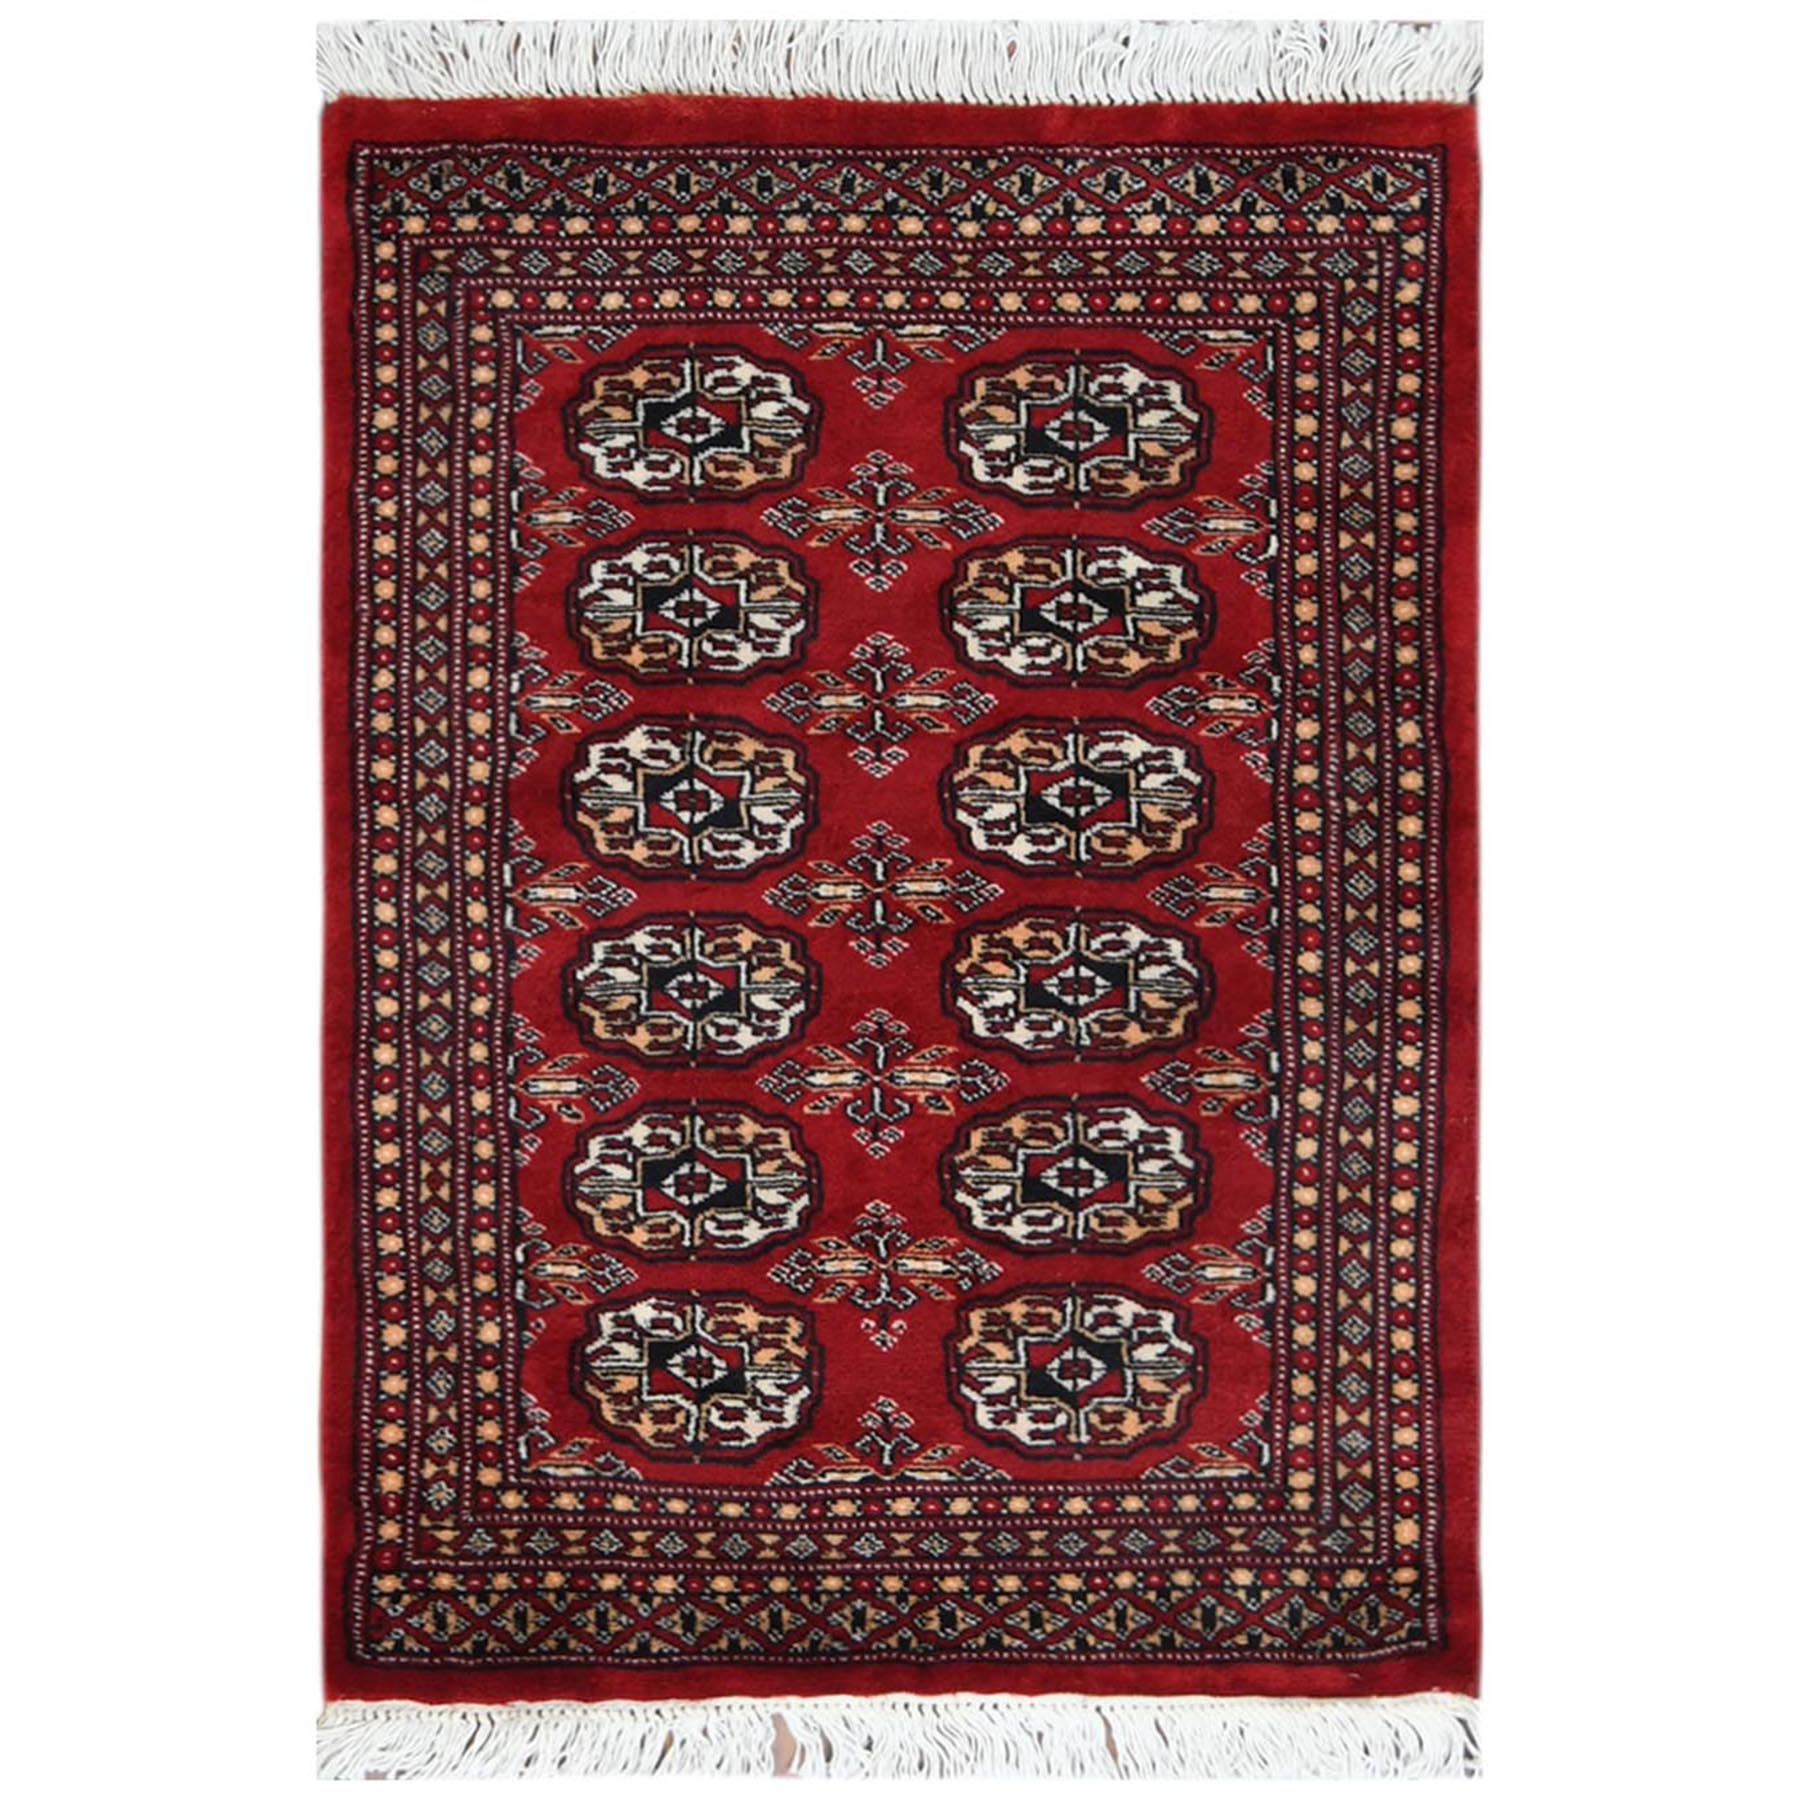 Nomadic And Village Collection Hand Knotted Red Rug No: 1122752